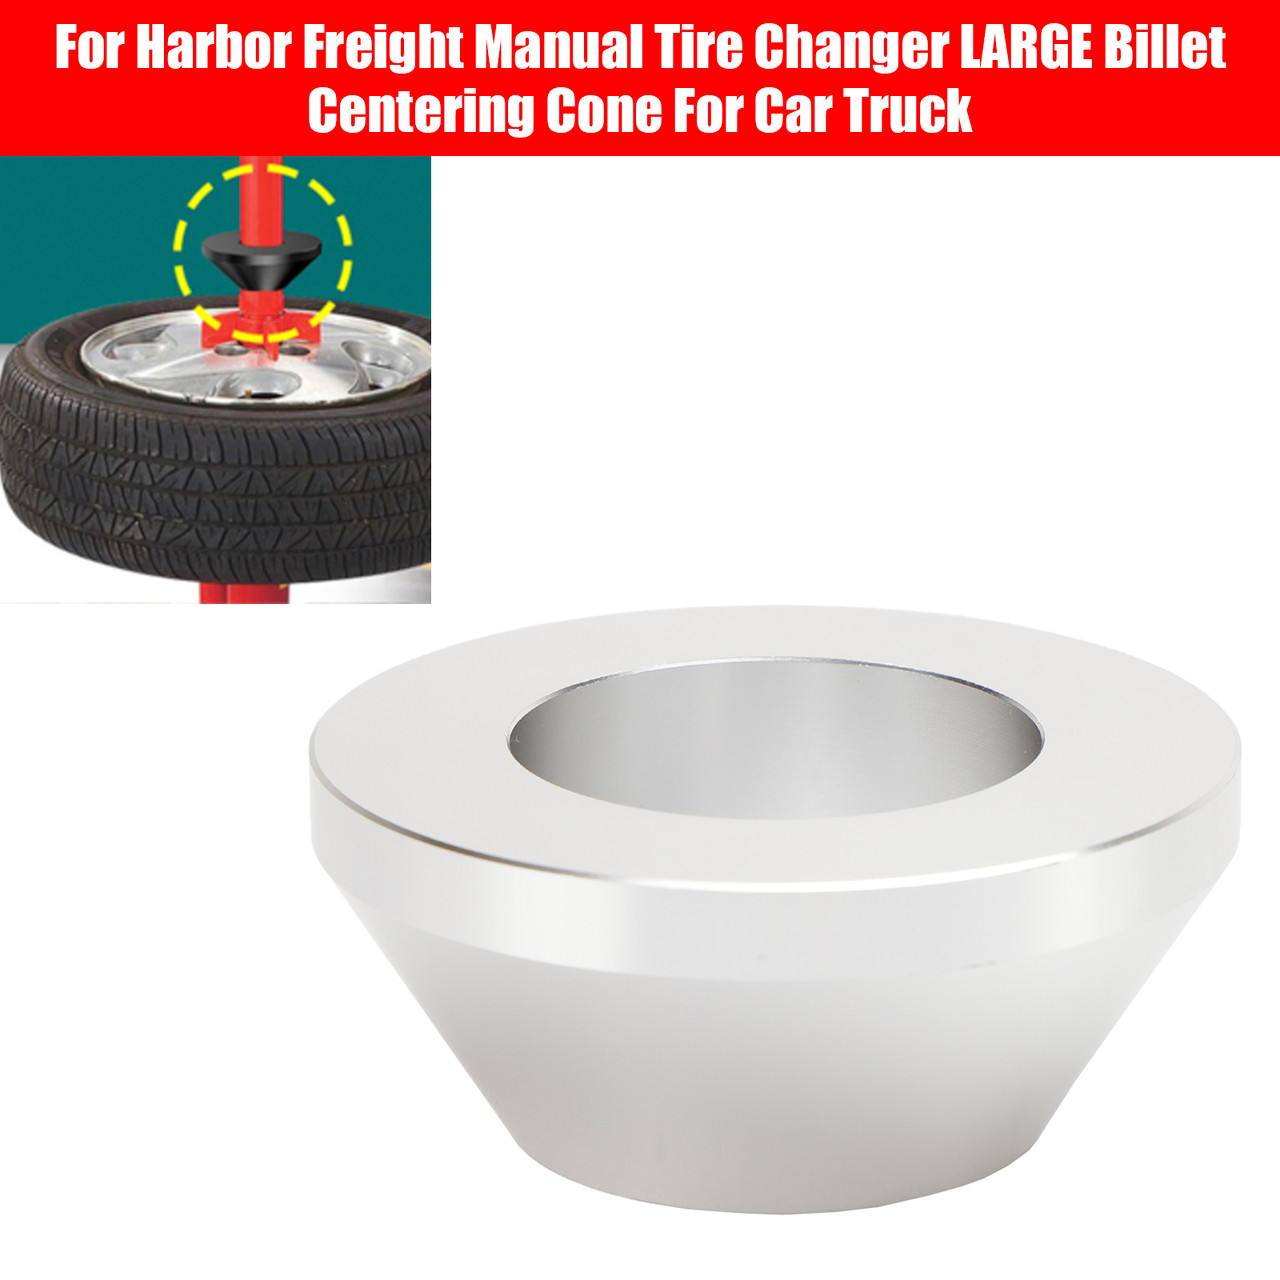 For Harbor Freight Manual Tire Changer LARGE Billet Centering Cone For Car Truck